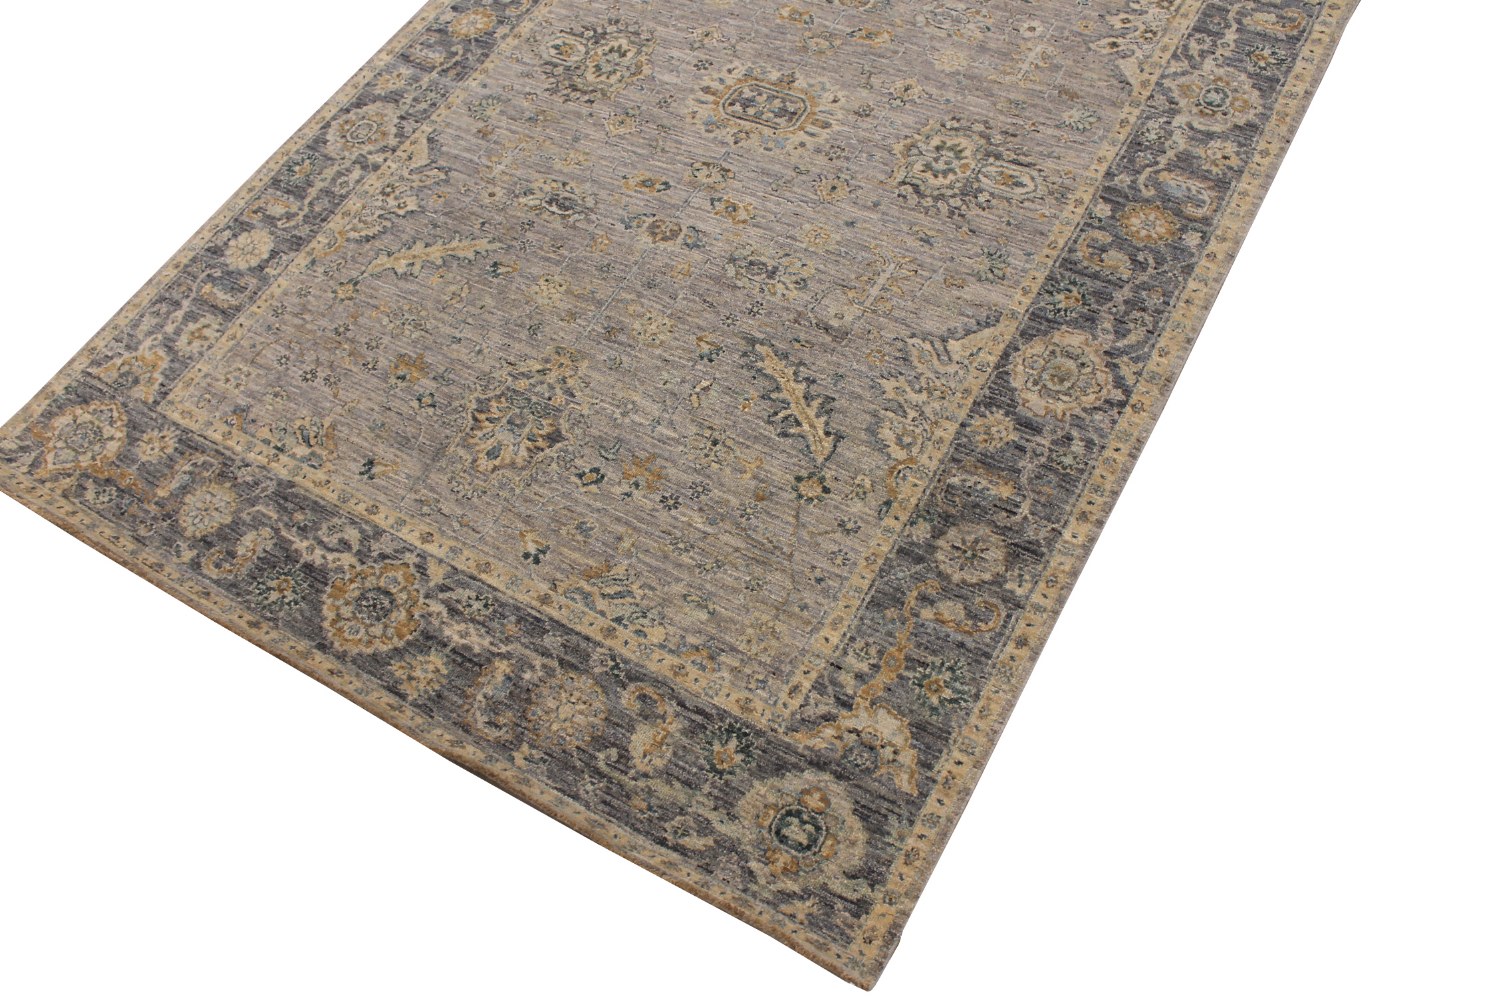 6x9 Traditional Hand Knotted Wool Area Rug - MR028606